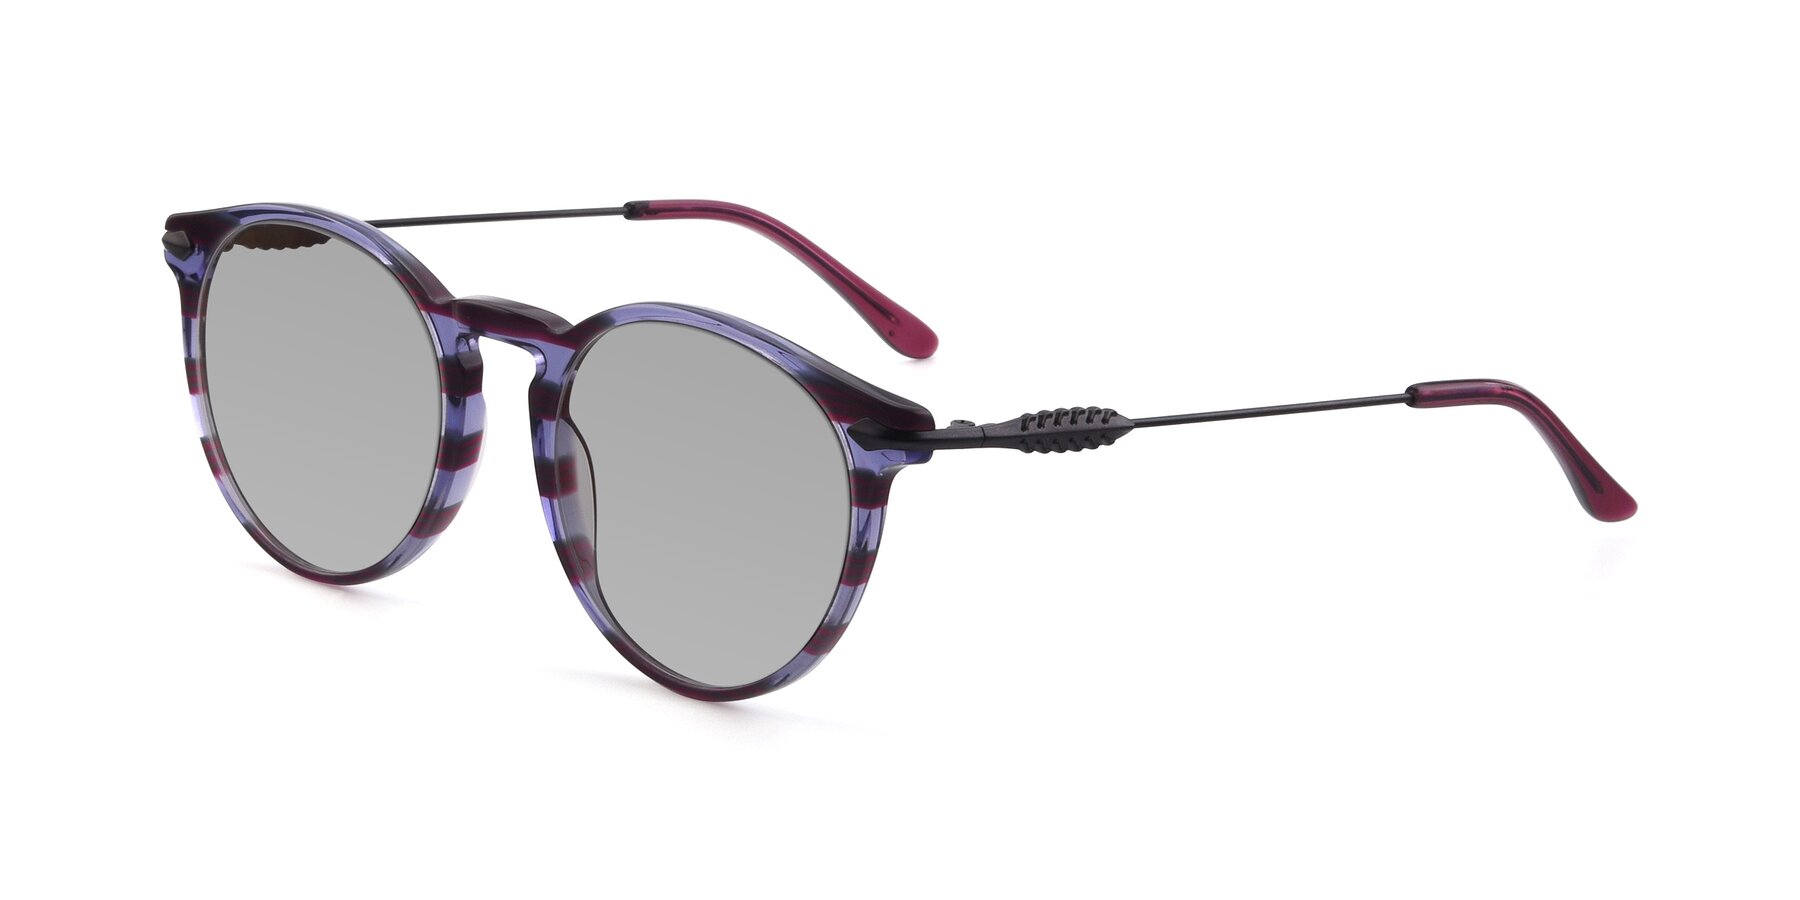 Angle of 17660 in Stripe Purple with Light Gray Tinted Lenses